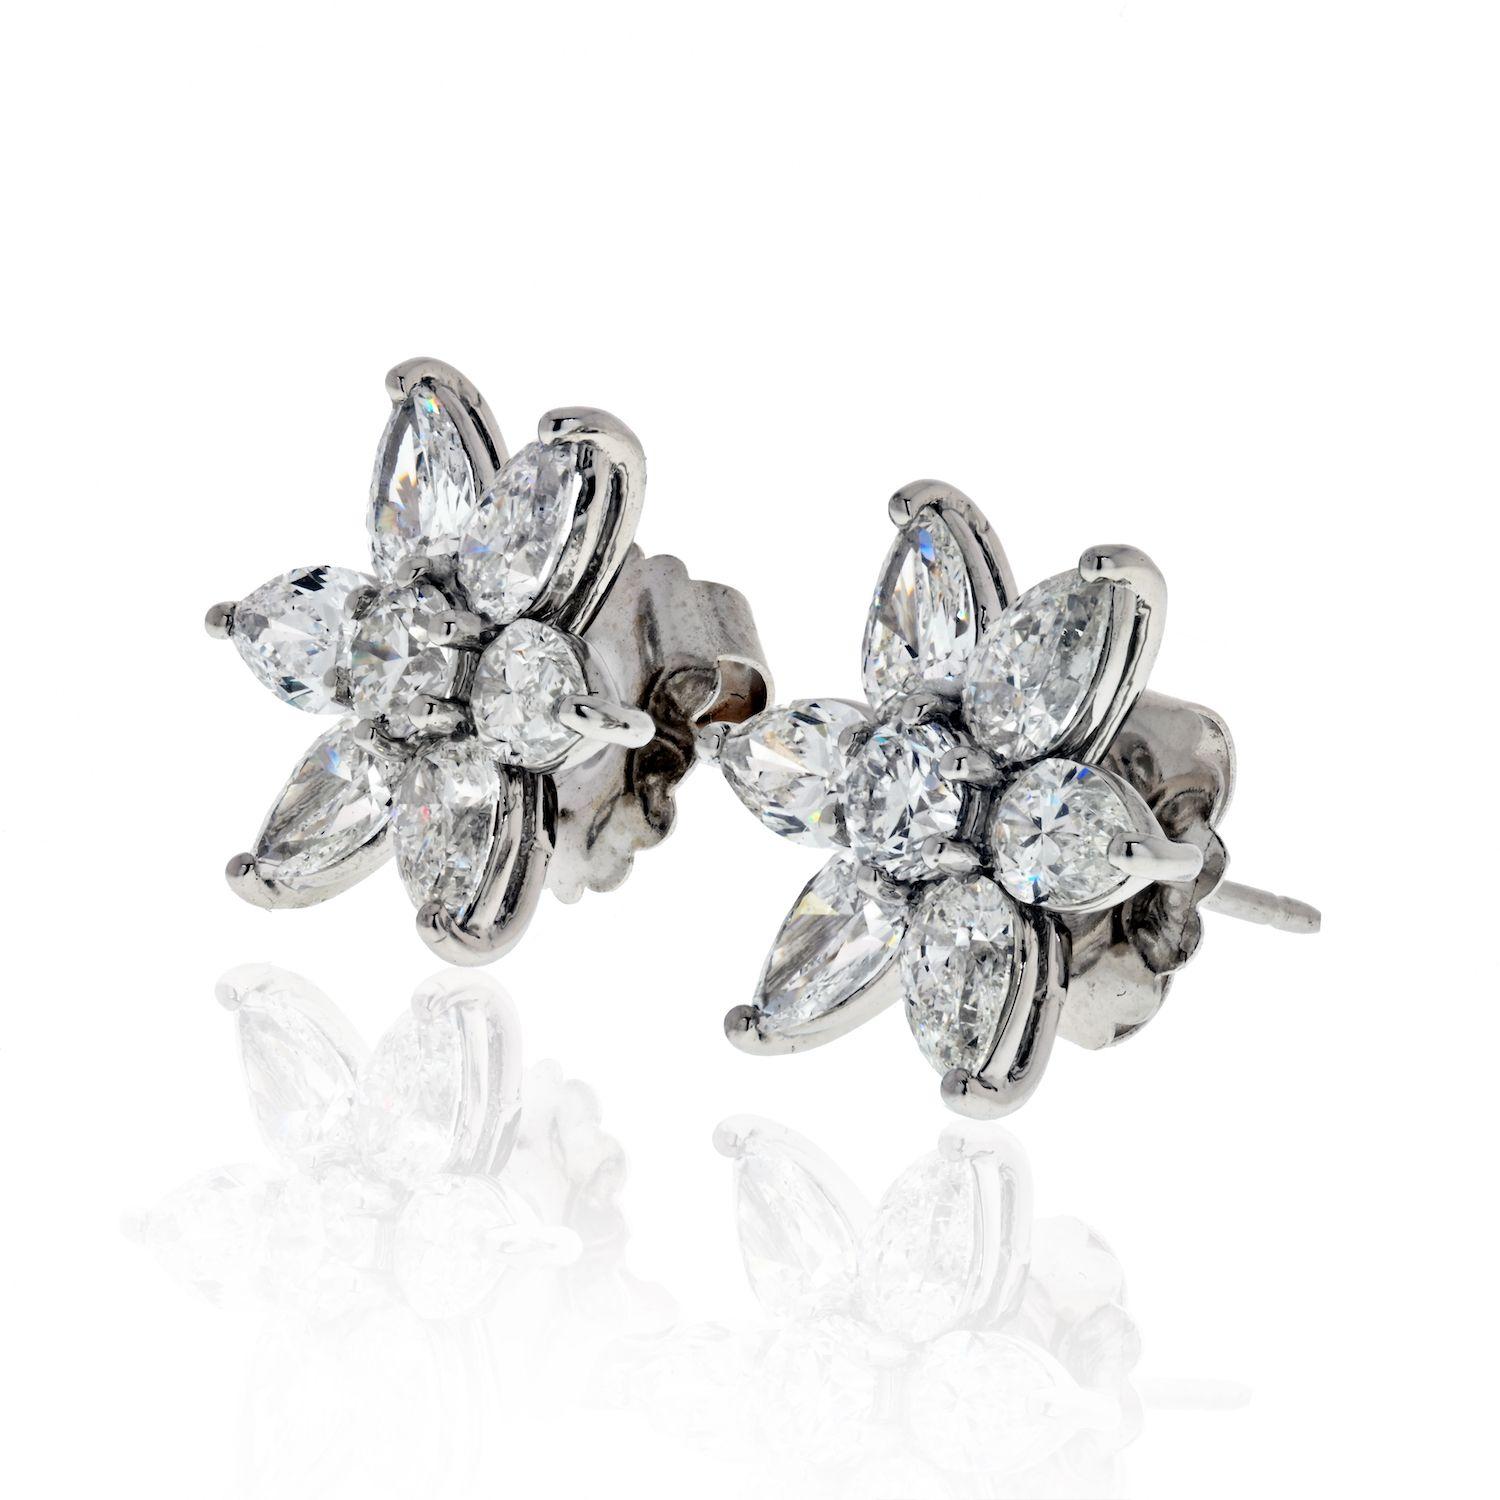 Lovely diamond starflower earrings from our estate collection. Crafted in 18k white gold with pear cuts and round diamonds these are a perfect gift for the Holidays. Posts with a heavy push backs will keep these secure in place. 
Total carat weight: